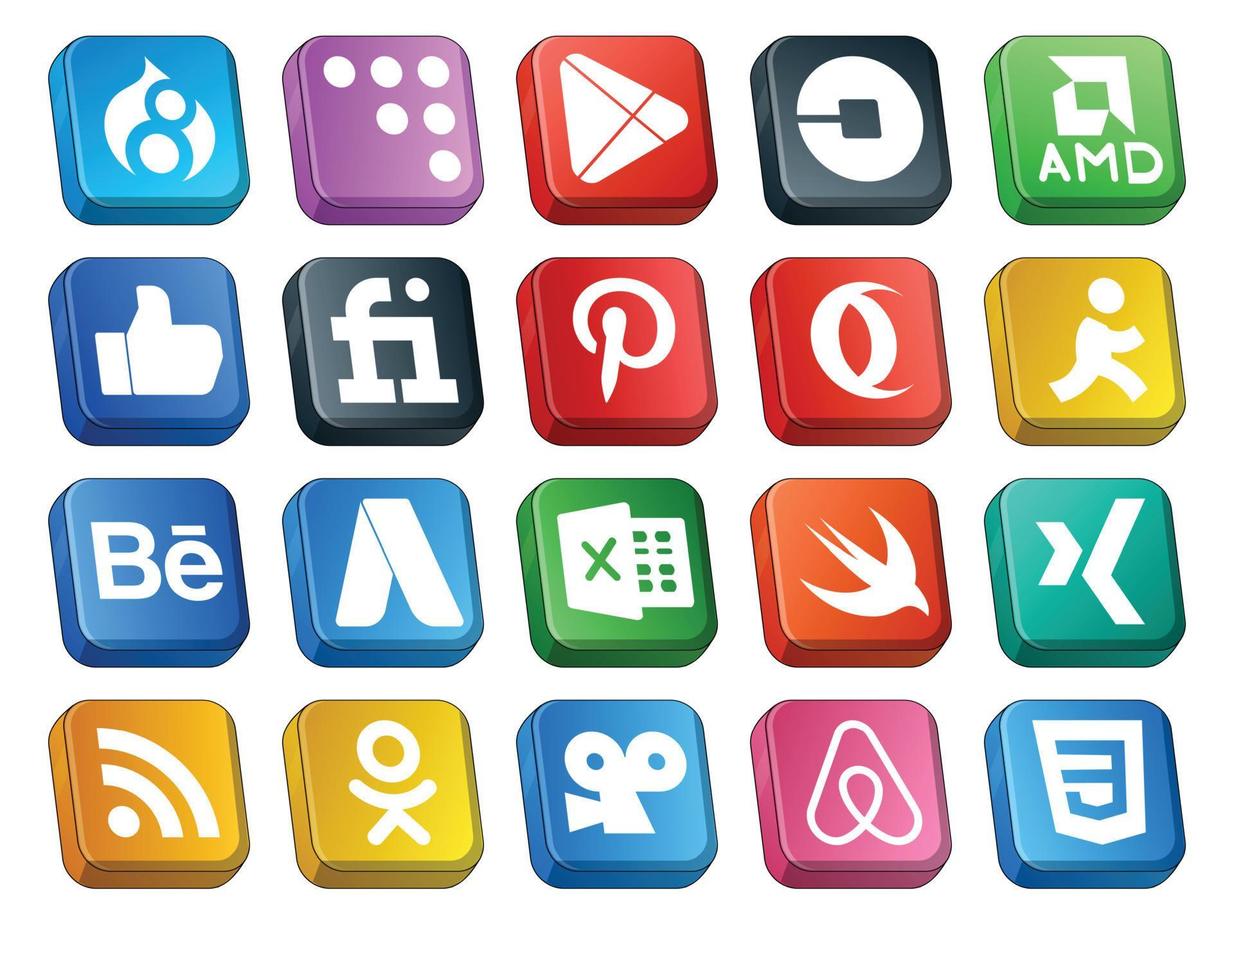 20 Social Media Icon Pack Including xing excel like adwords aim vector